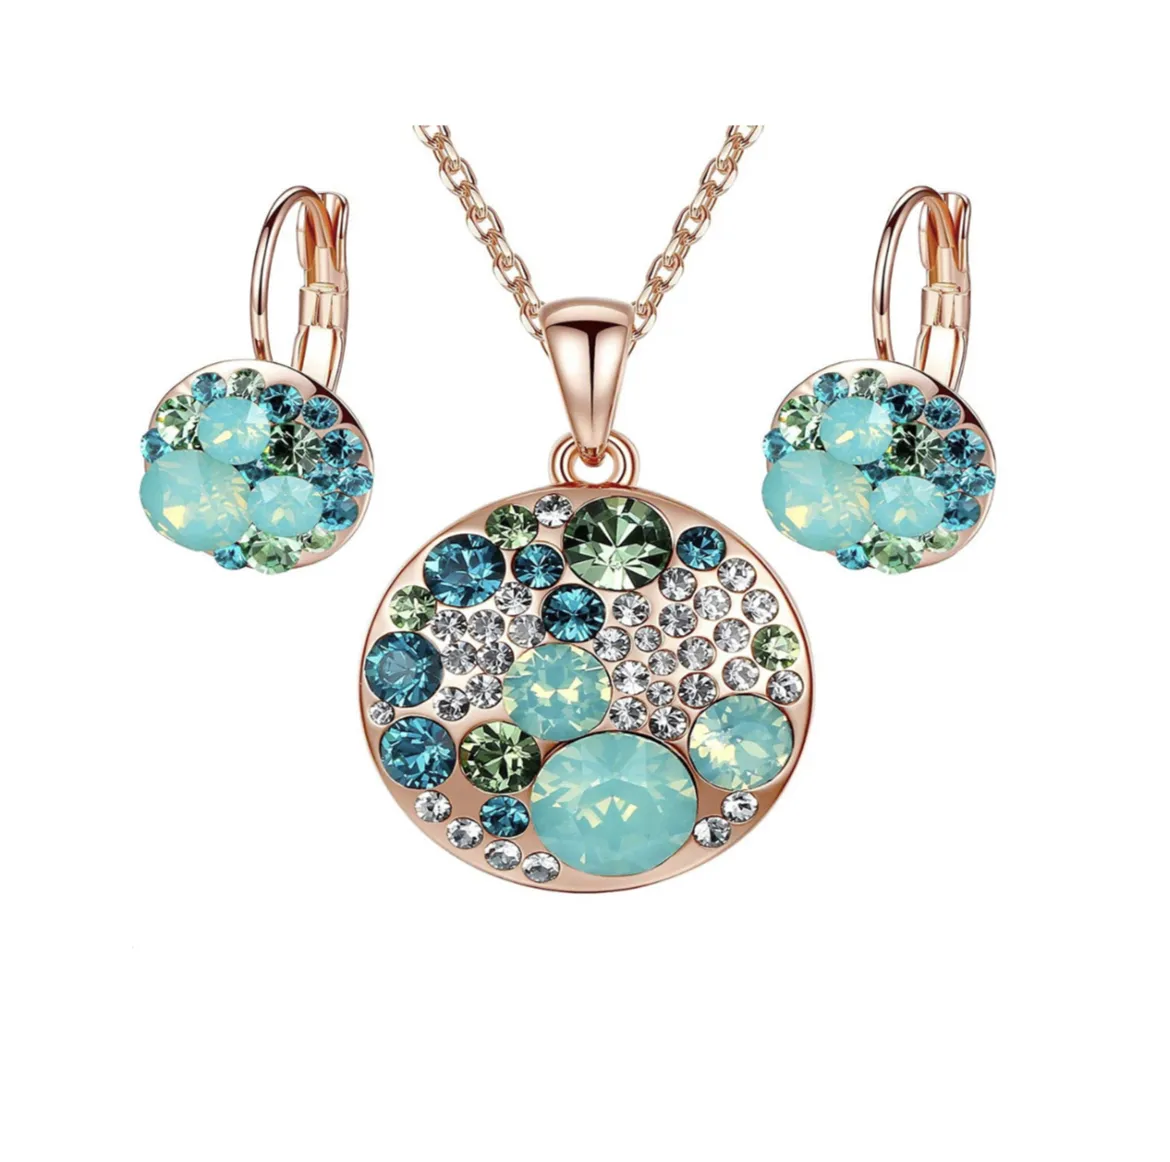 Beautiful Multicolored crystal Gold plated pendant necklace earrings Fashion women's jewelry set with a sense of premium design